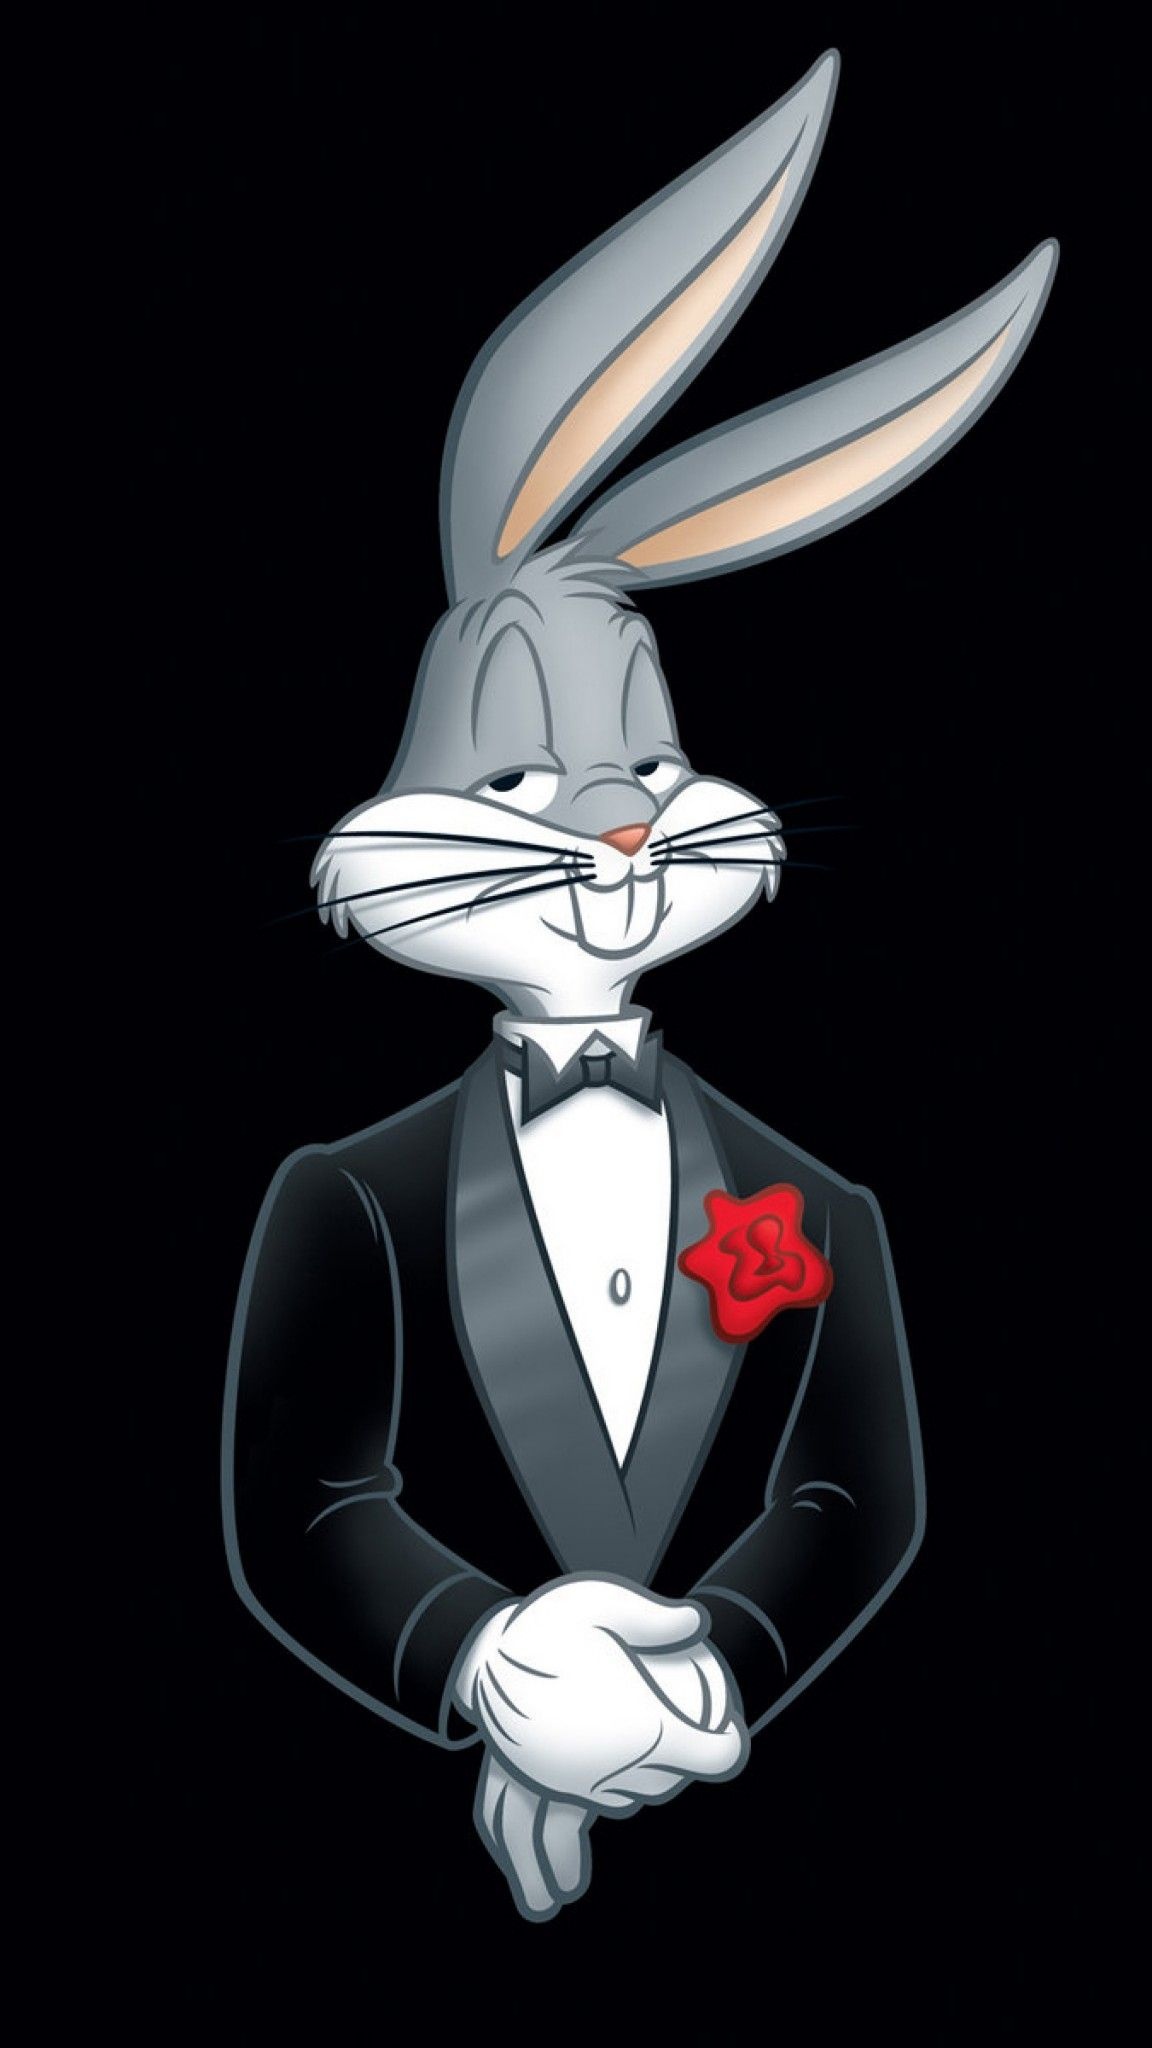 HD wallpaper, Iphone Hd Bugs Bunny Background Photo, Dope Wallpapers, 1160X2050 Hd Phone, Bugs Bunny